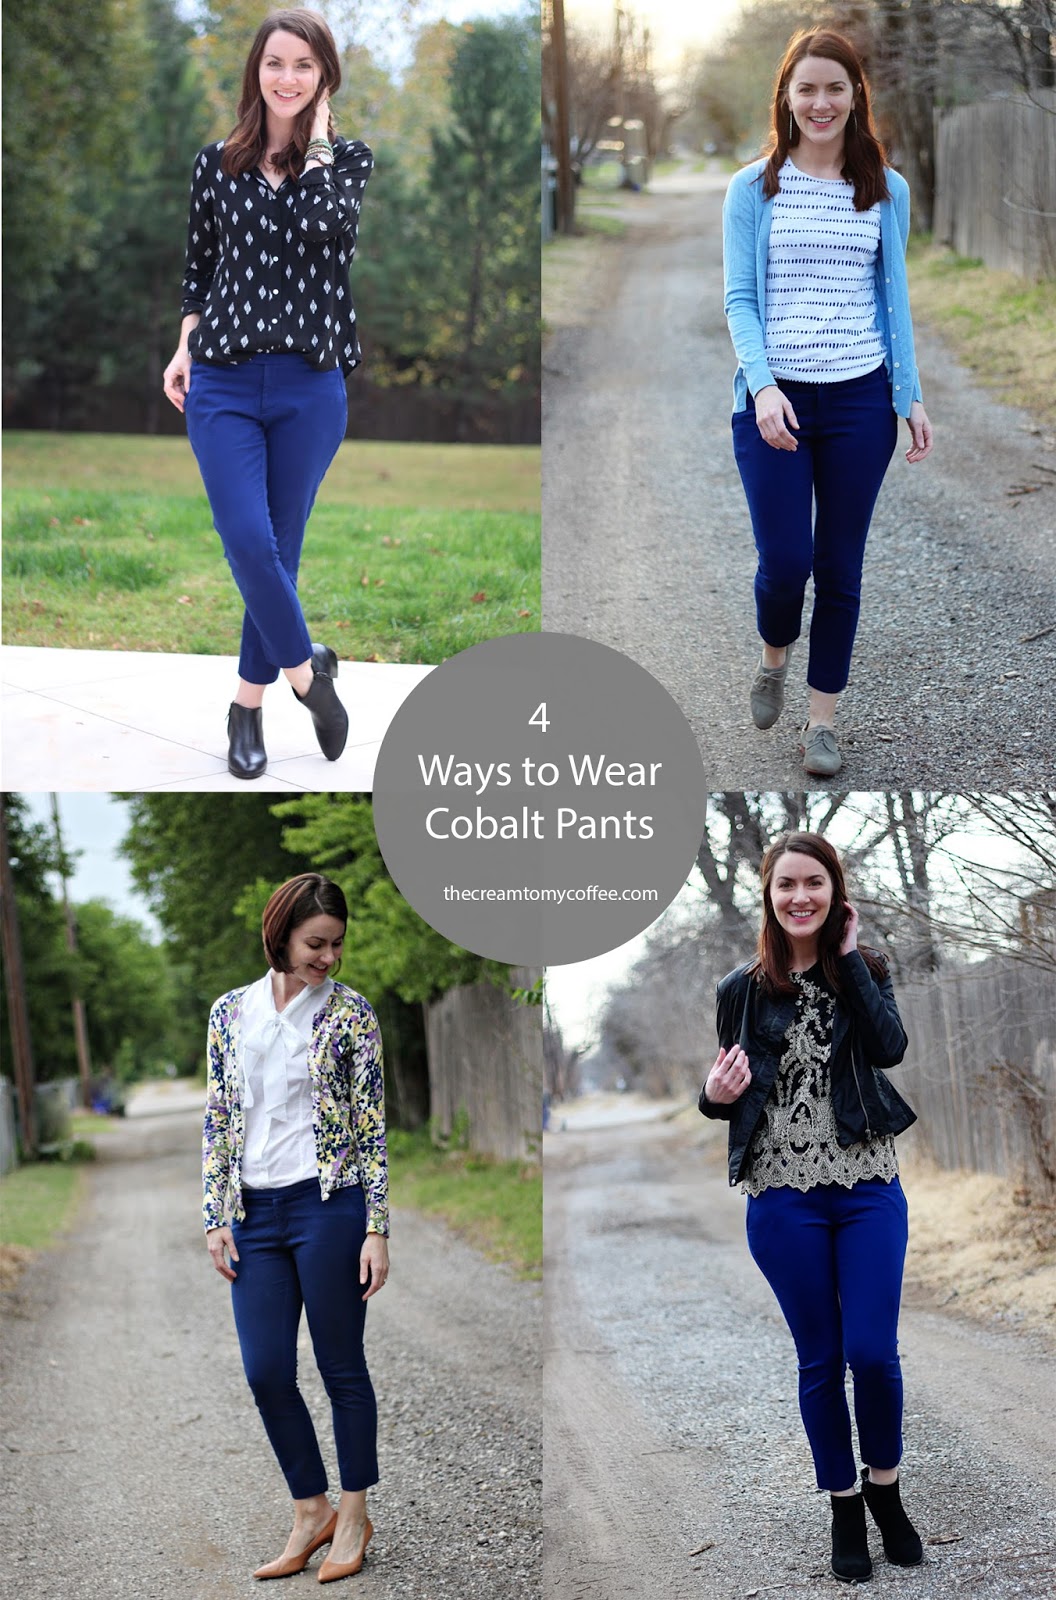 4 (more!) Ways to Wear Cobalt Pants | The Cream to My Coffee